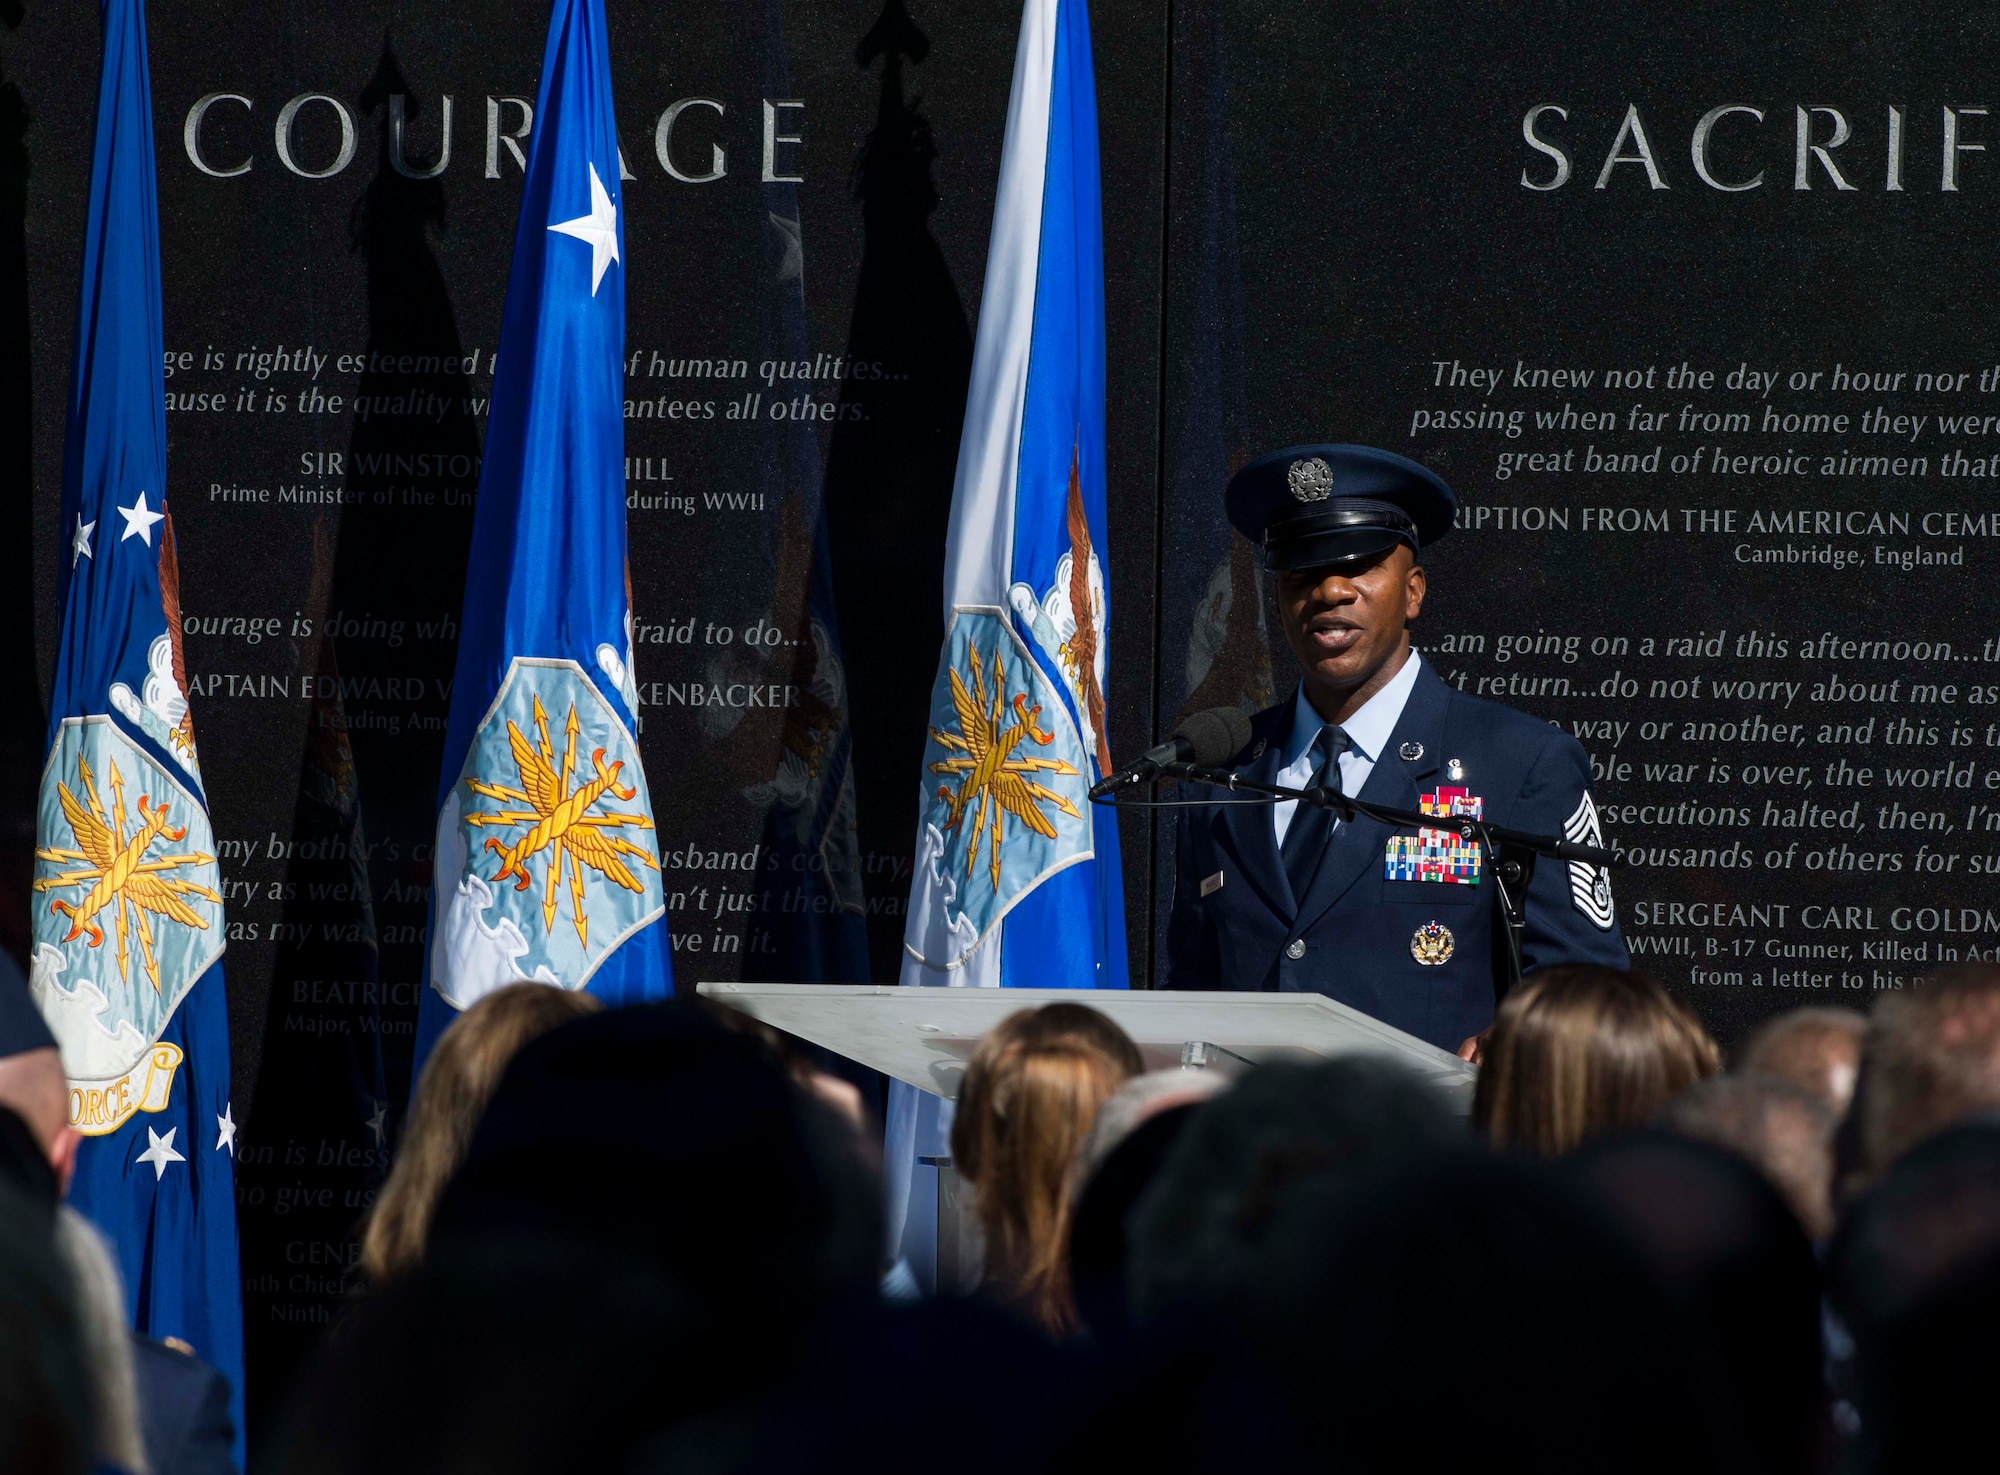 Chief Master Sgt. of the Air Force Kaleth O. Wright speaks during Master Sgt. John Chapman’s name unveiling ceremony at the Air Force Memorial in Arlington, Va., Aug. 24, 2018. Chapman was posthumously awarded the Medal of Honor for actions on Takur Ghar Mountain in Afghanistan March 4, 2002. An elite special operations team was ambushed by the enemy and came under heavy fire from multiple directions. Chapman immediately charged an enemy bunker through thigh-deep snow and killed all enemy occupants. Courageously moving from cover to assault a second machine gun bunker, he was injured by enemy fire. Despite severe wounds, he fought relentlessly, sustaining a violent engagement with multiple enemy personnel before making the ultimate sacrifice. With his last actions he saved the lives of his teammates. (U.S. Air Force photo by Tech. Sgt. DeAndre Curtiss)